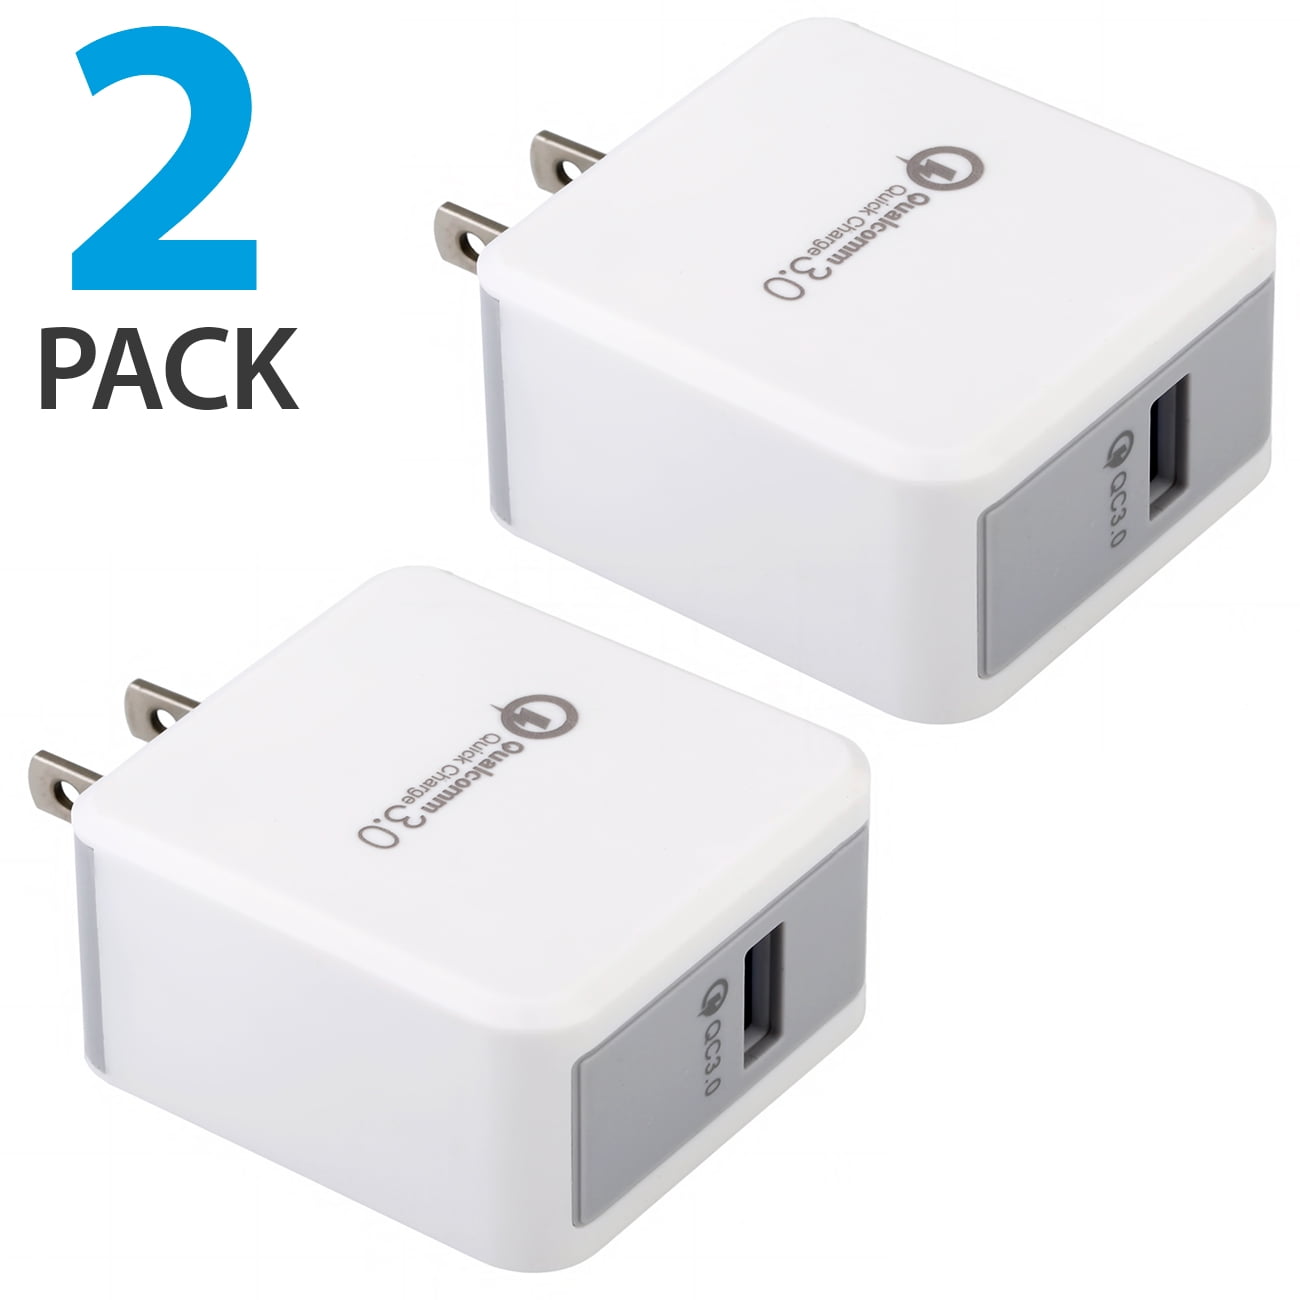 Trunk bibliotheek voor de helft vermijden 2 Pack Qualcomm 3.0 Quick Charge Certified 18W Fast Rapid USB Wall Charger  Adapter For Apple iPhone X iPhone 8 Plus Samsung Galaxy S8 S9+ Plus Note 9  Note 8 Galaxy S7